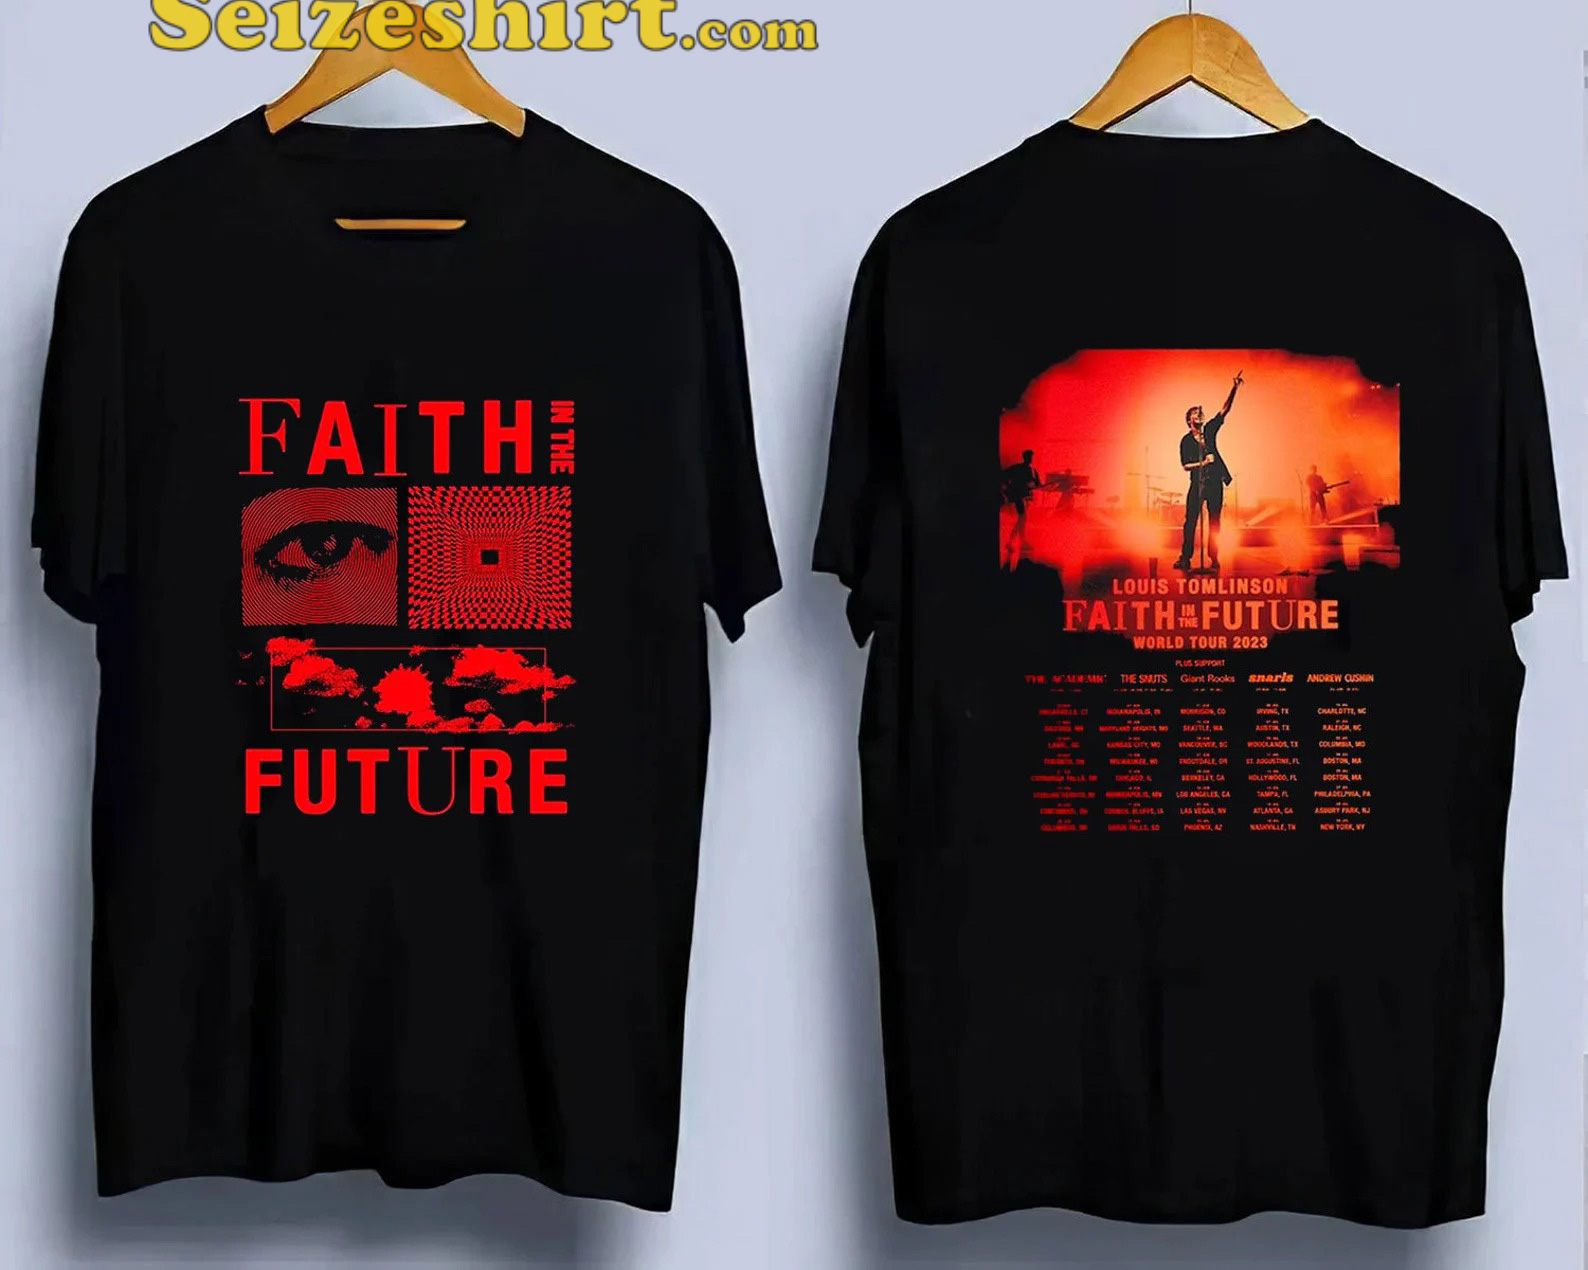 Faith In The Future, Louis Tomlinson Tour 2023 Shirt - Ink In Action